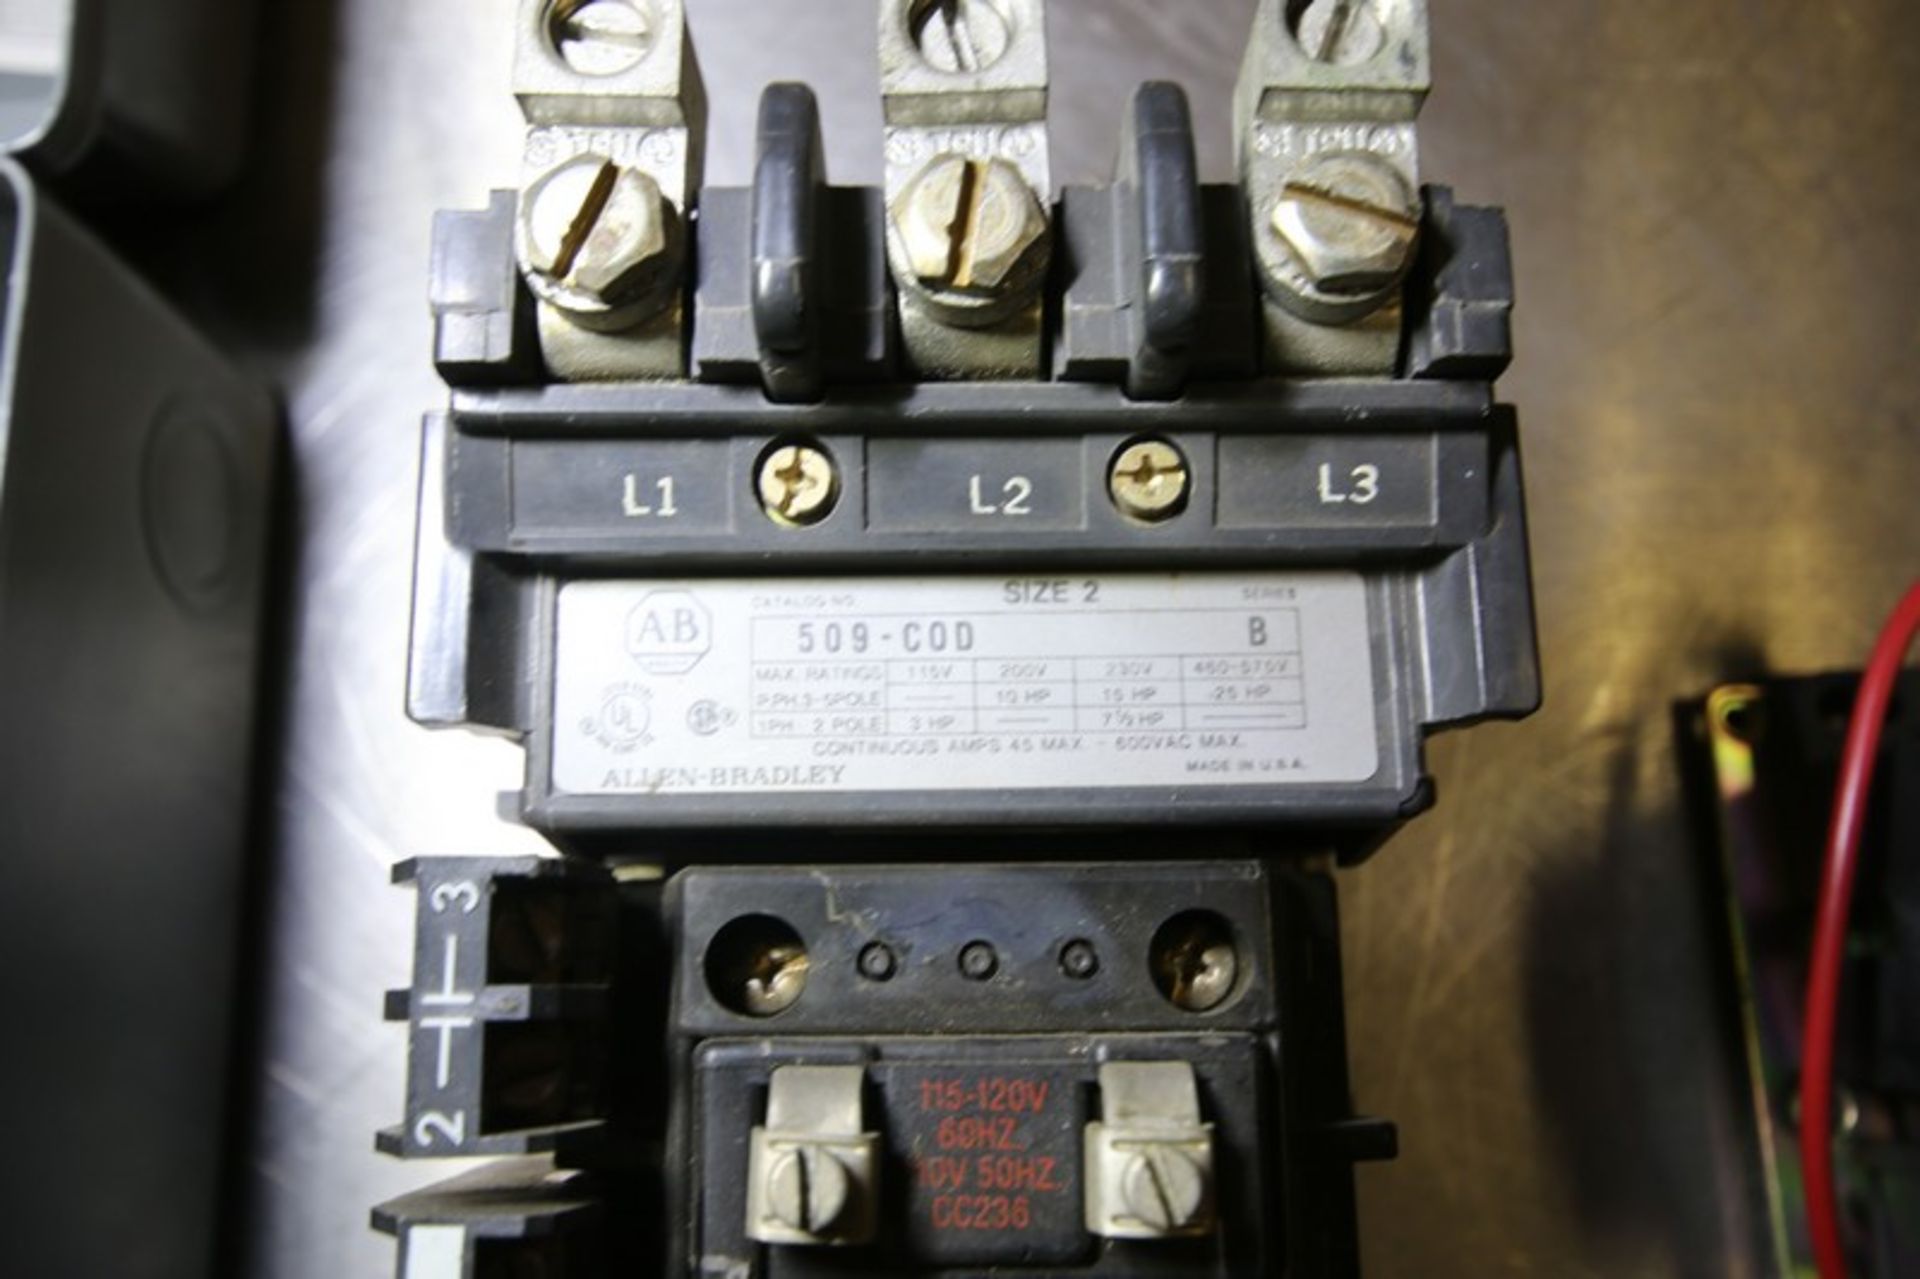 Lot of (3) Starters Including Allen Bradley Size 1 - 509-COD Series B - 10 to 25 hp, (1) Square D - Image 5 of 7